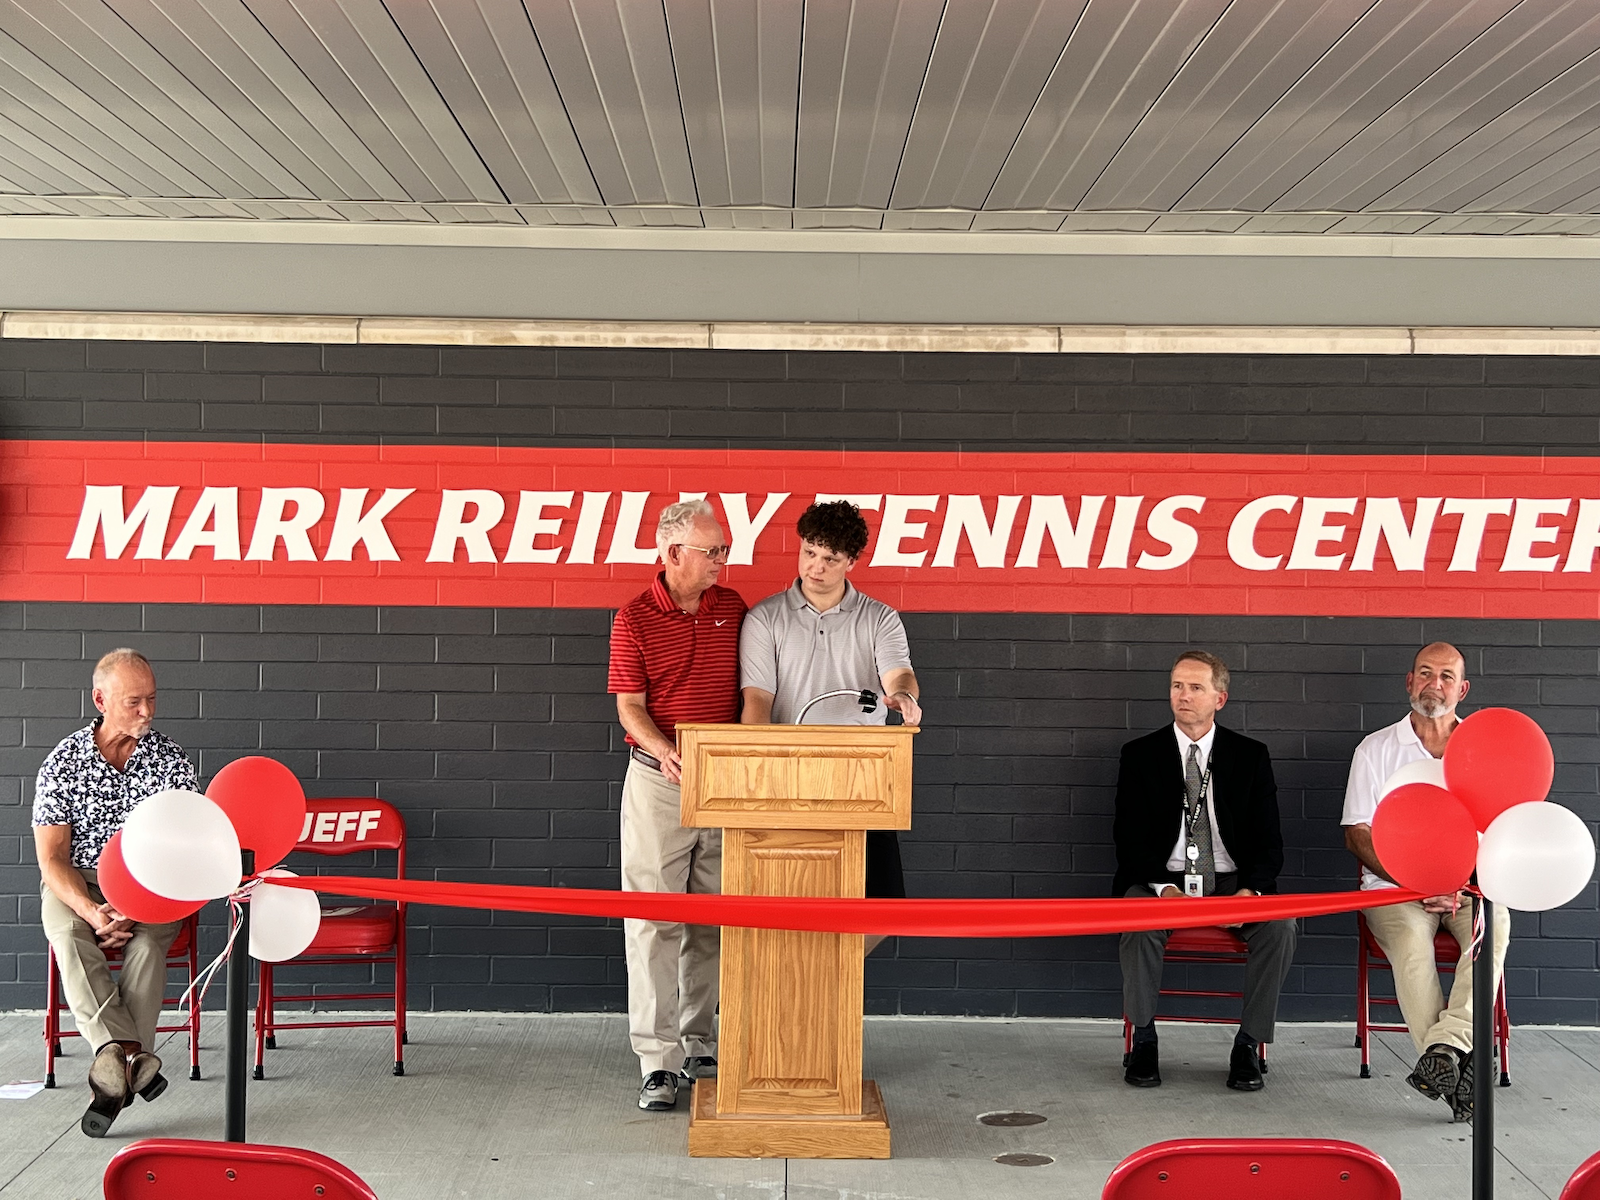 Mark Reilly Tennis Center - Ribbon Cutting gallery cover photo